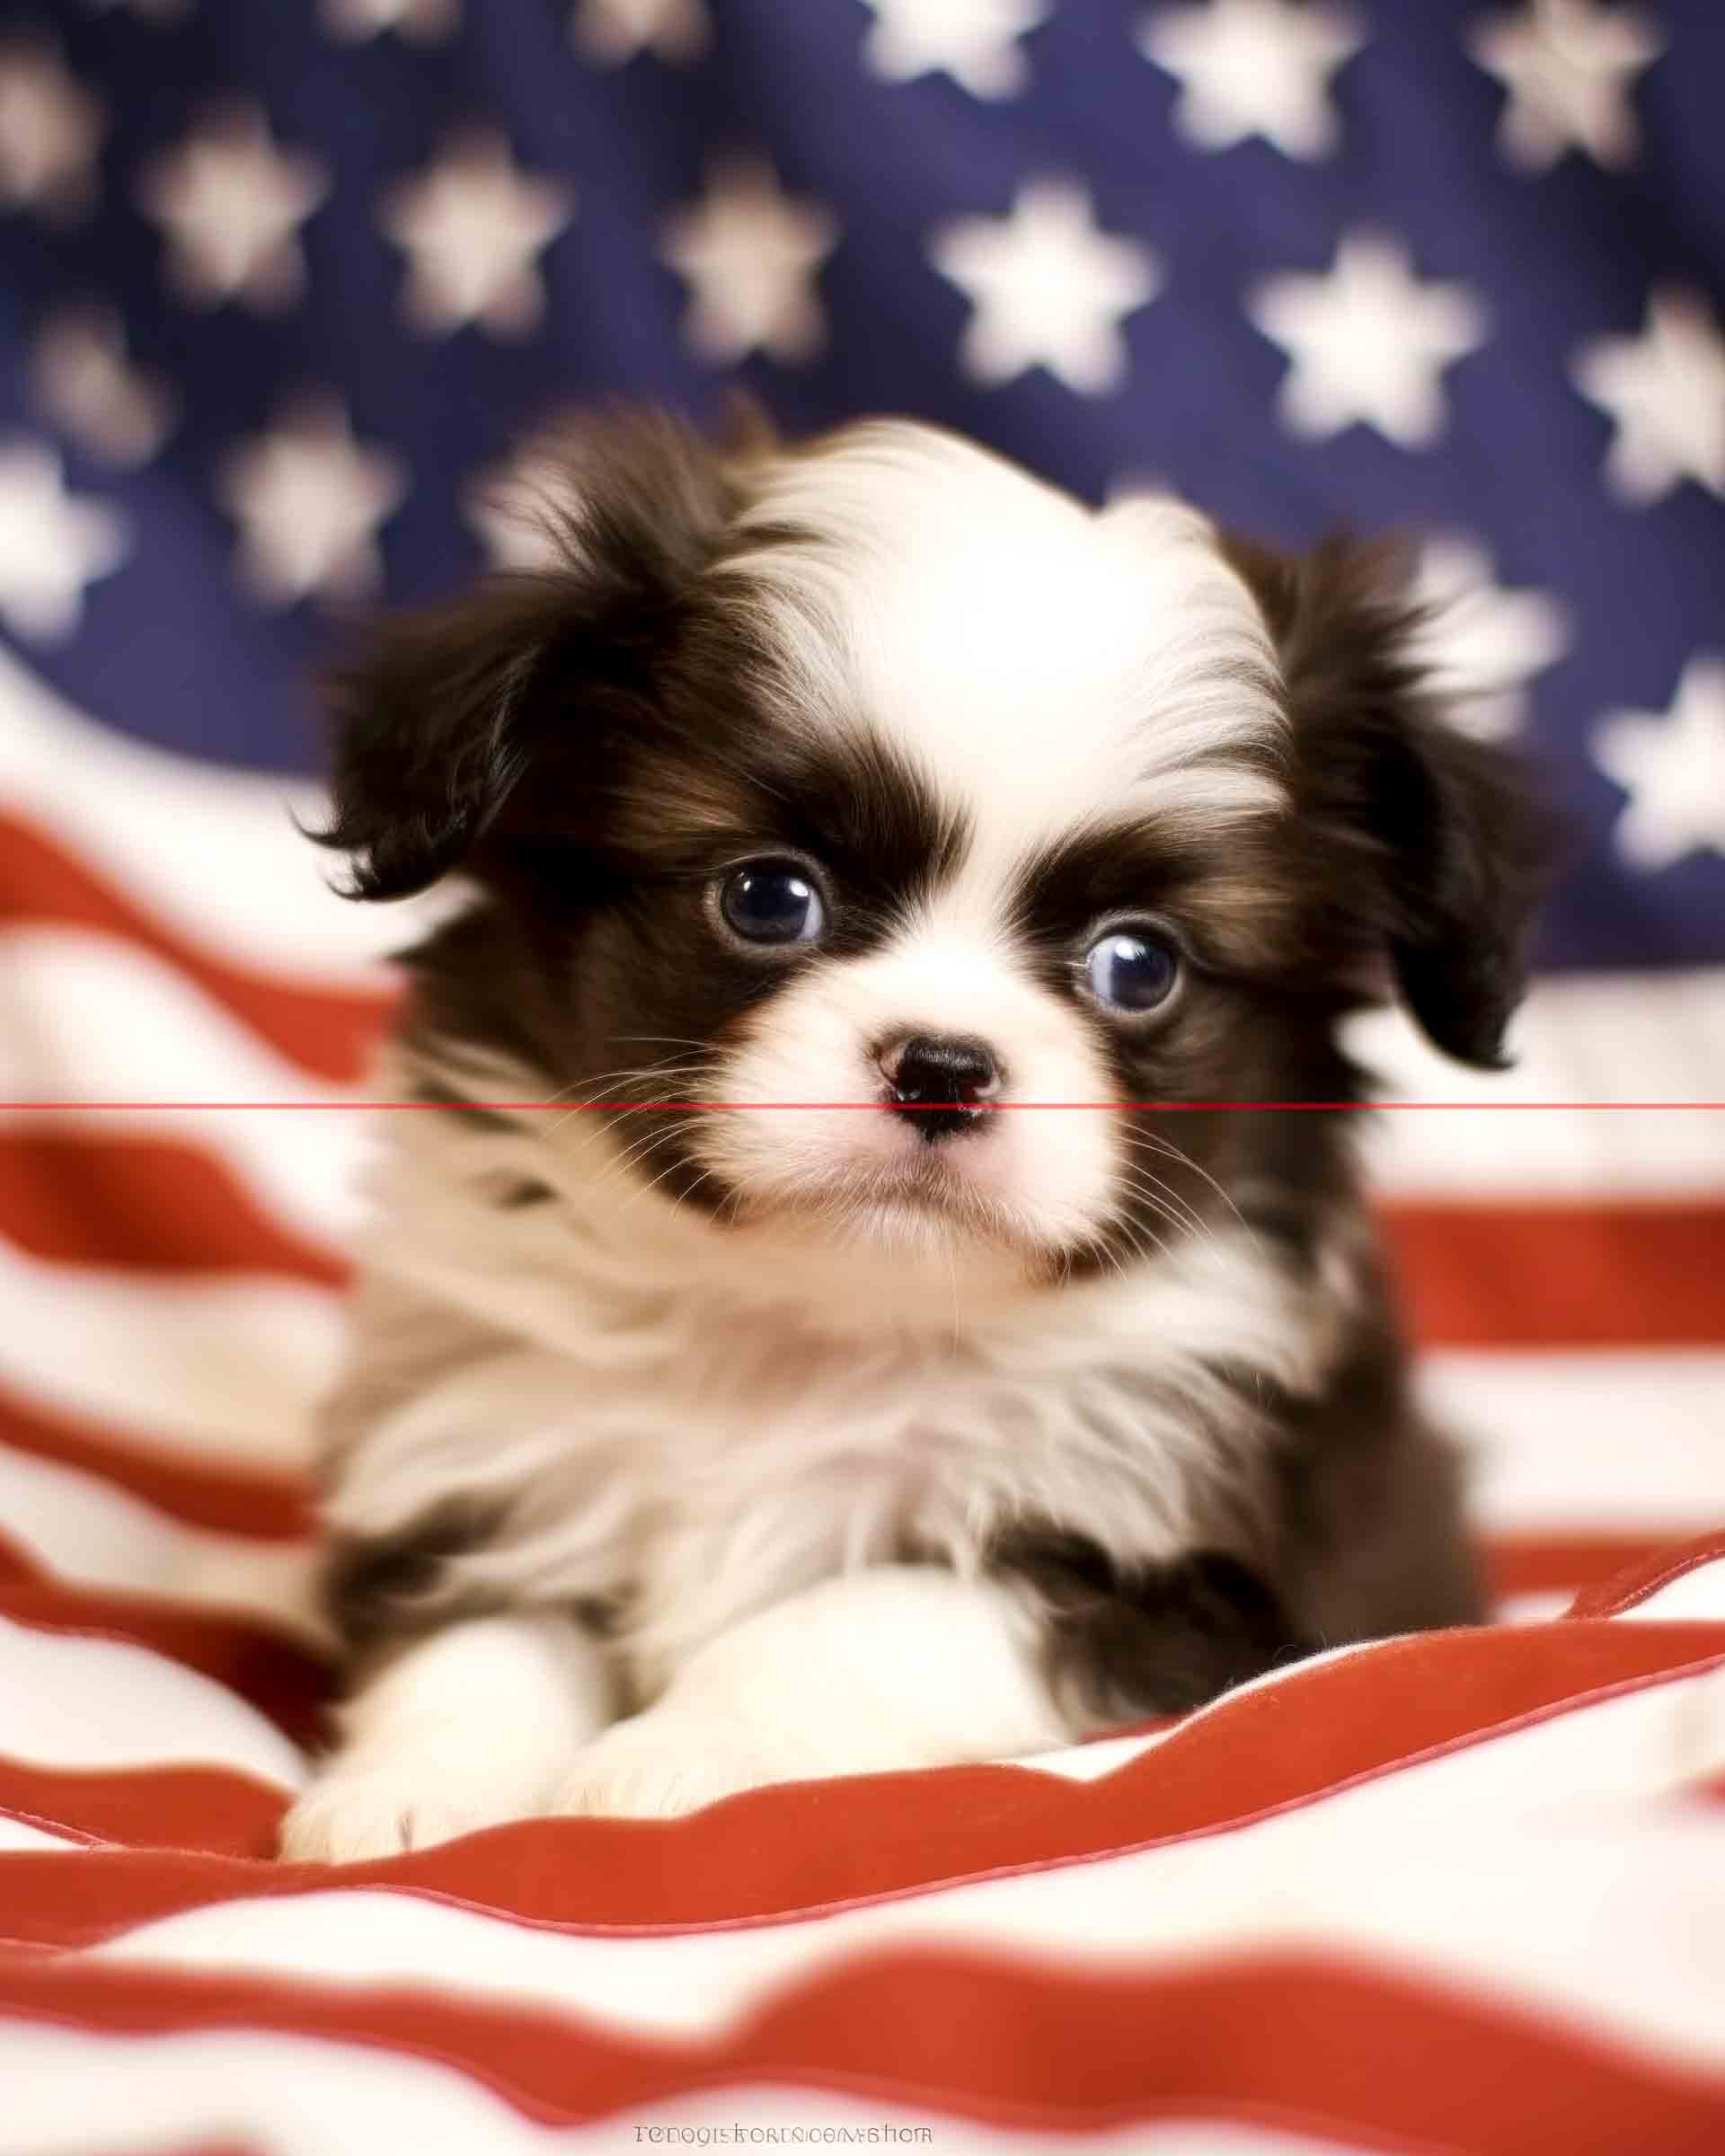 A japanese chin dog in front of an american flag adding a patriotic touch to the image, the dog has black and white fur, dark eyes, and a sweet puppy expression